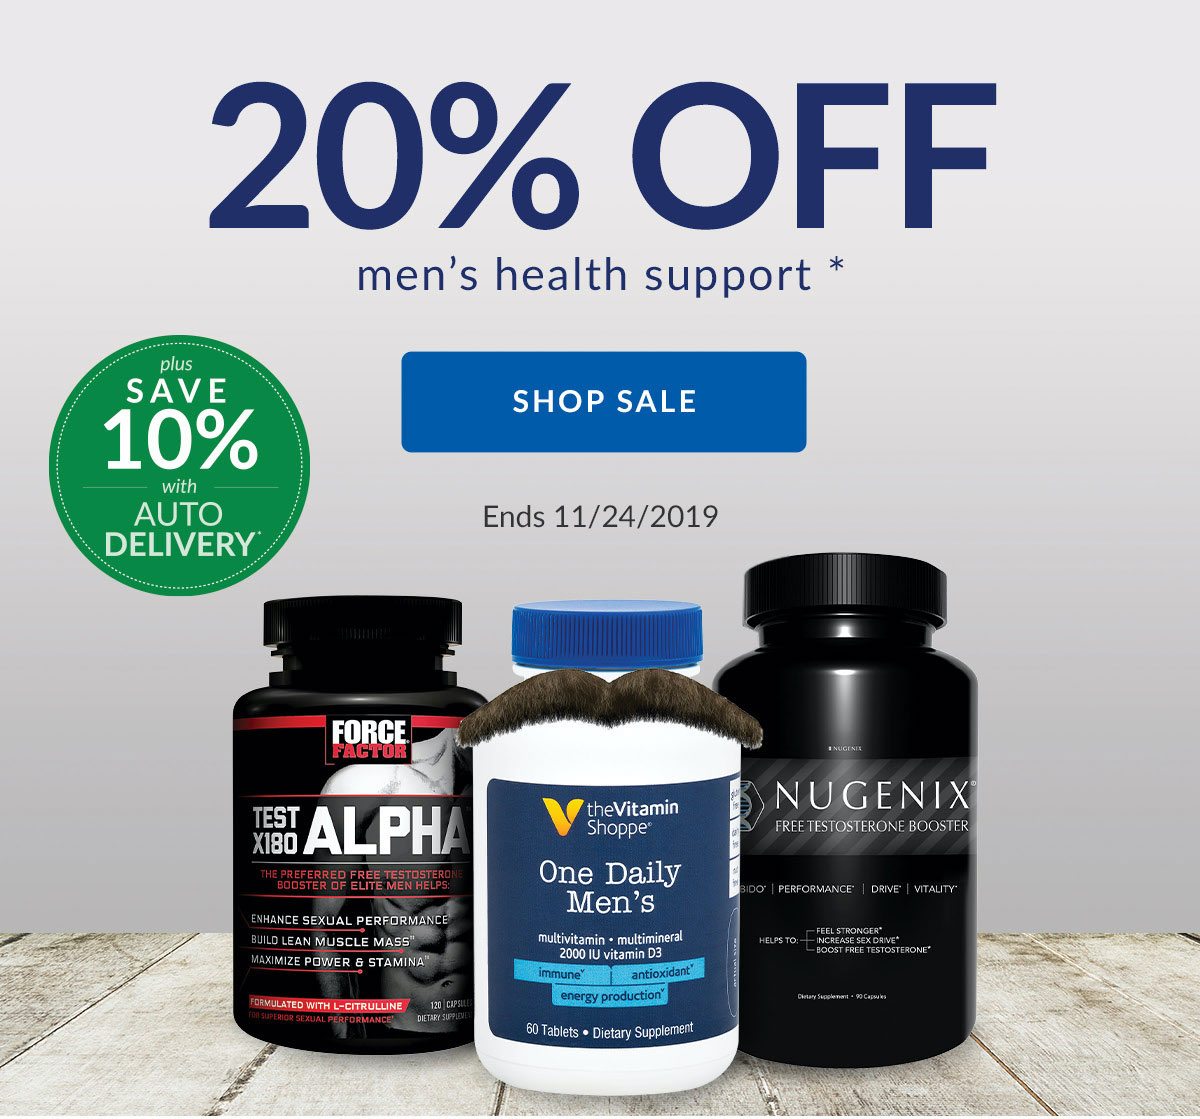 20% OFF men's health support * | SHOP SALE | Ends 11/24/2019 | plus SAVE 10% with AUTO DELIVERY